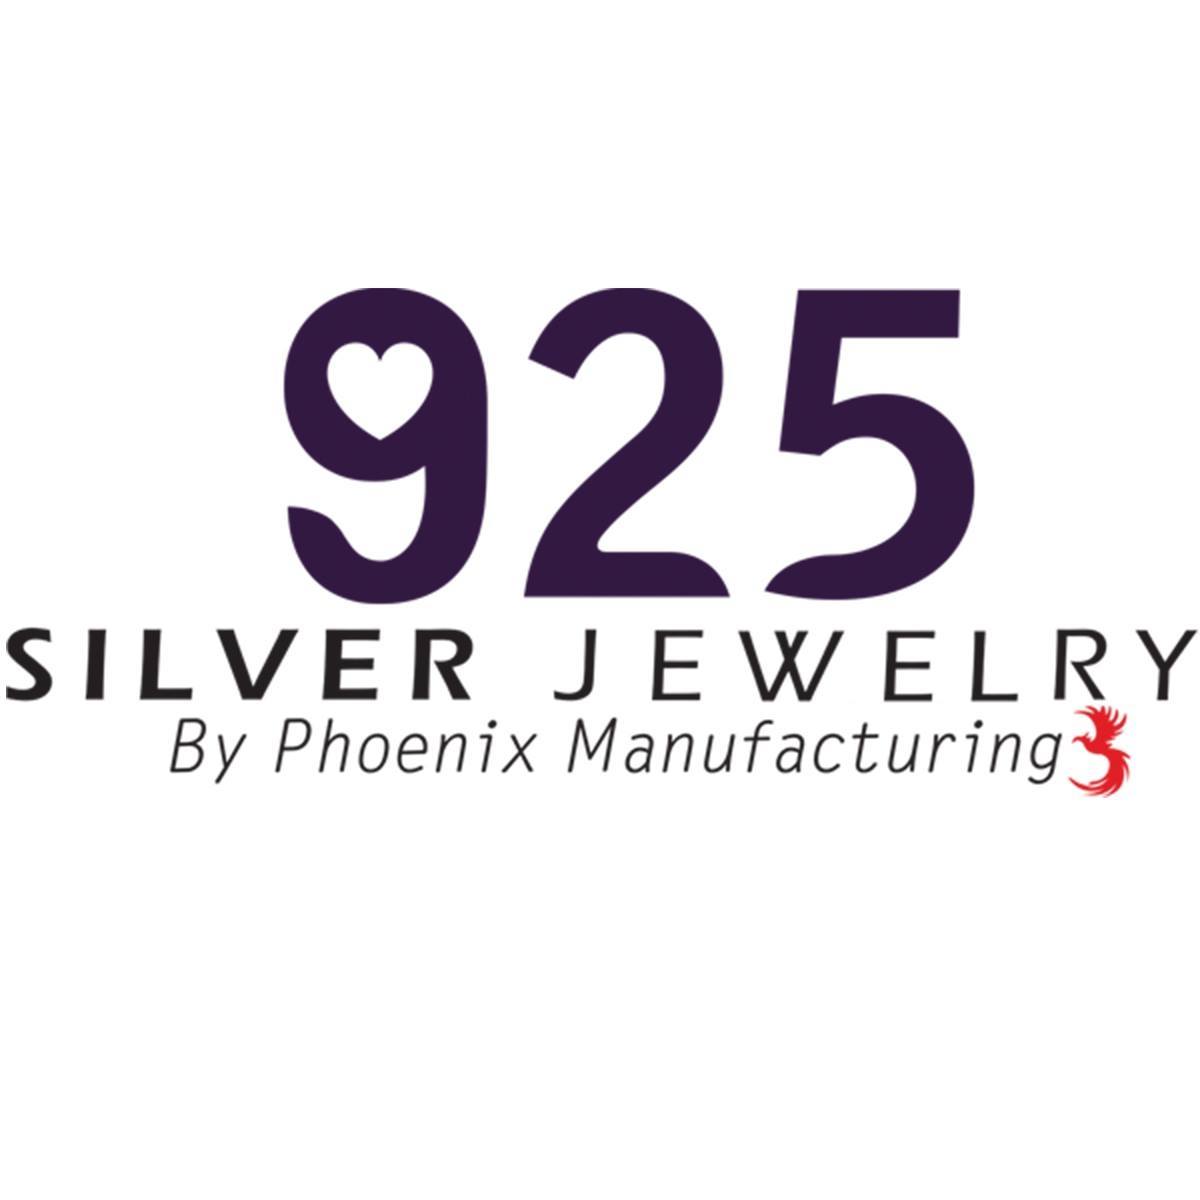 925 Silver Jewelry Continues to Expand with Designs That Are a Step Ahead of The Competition